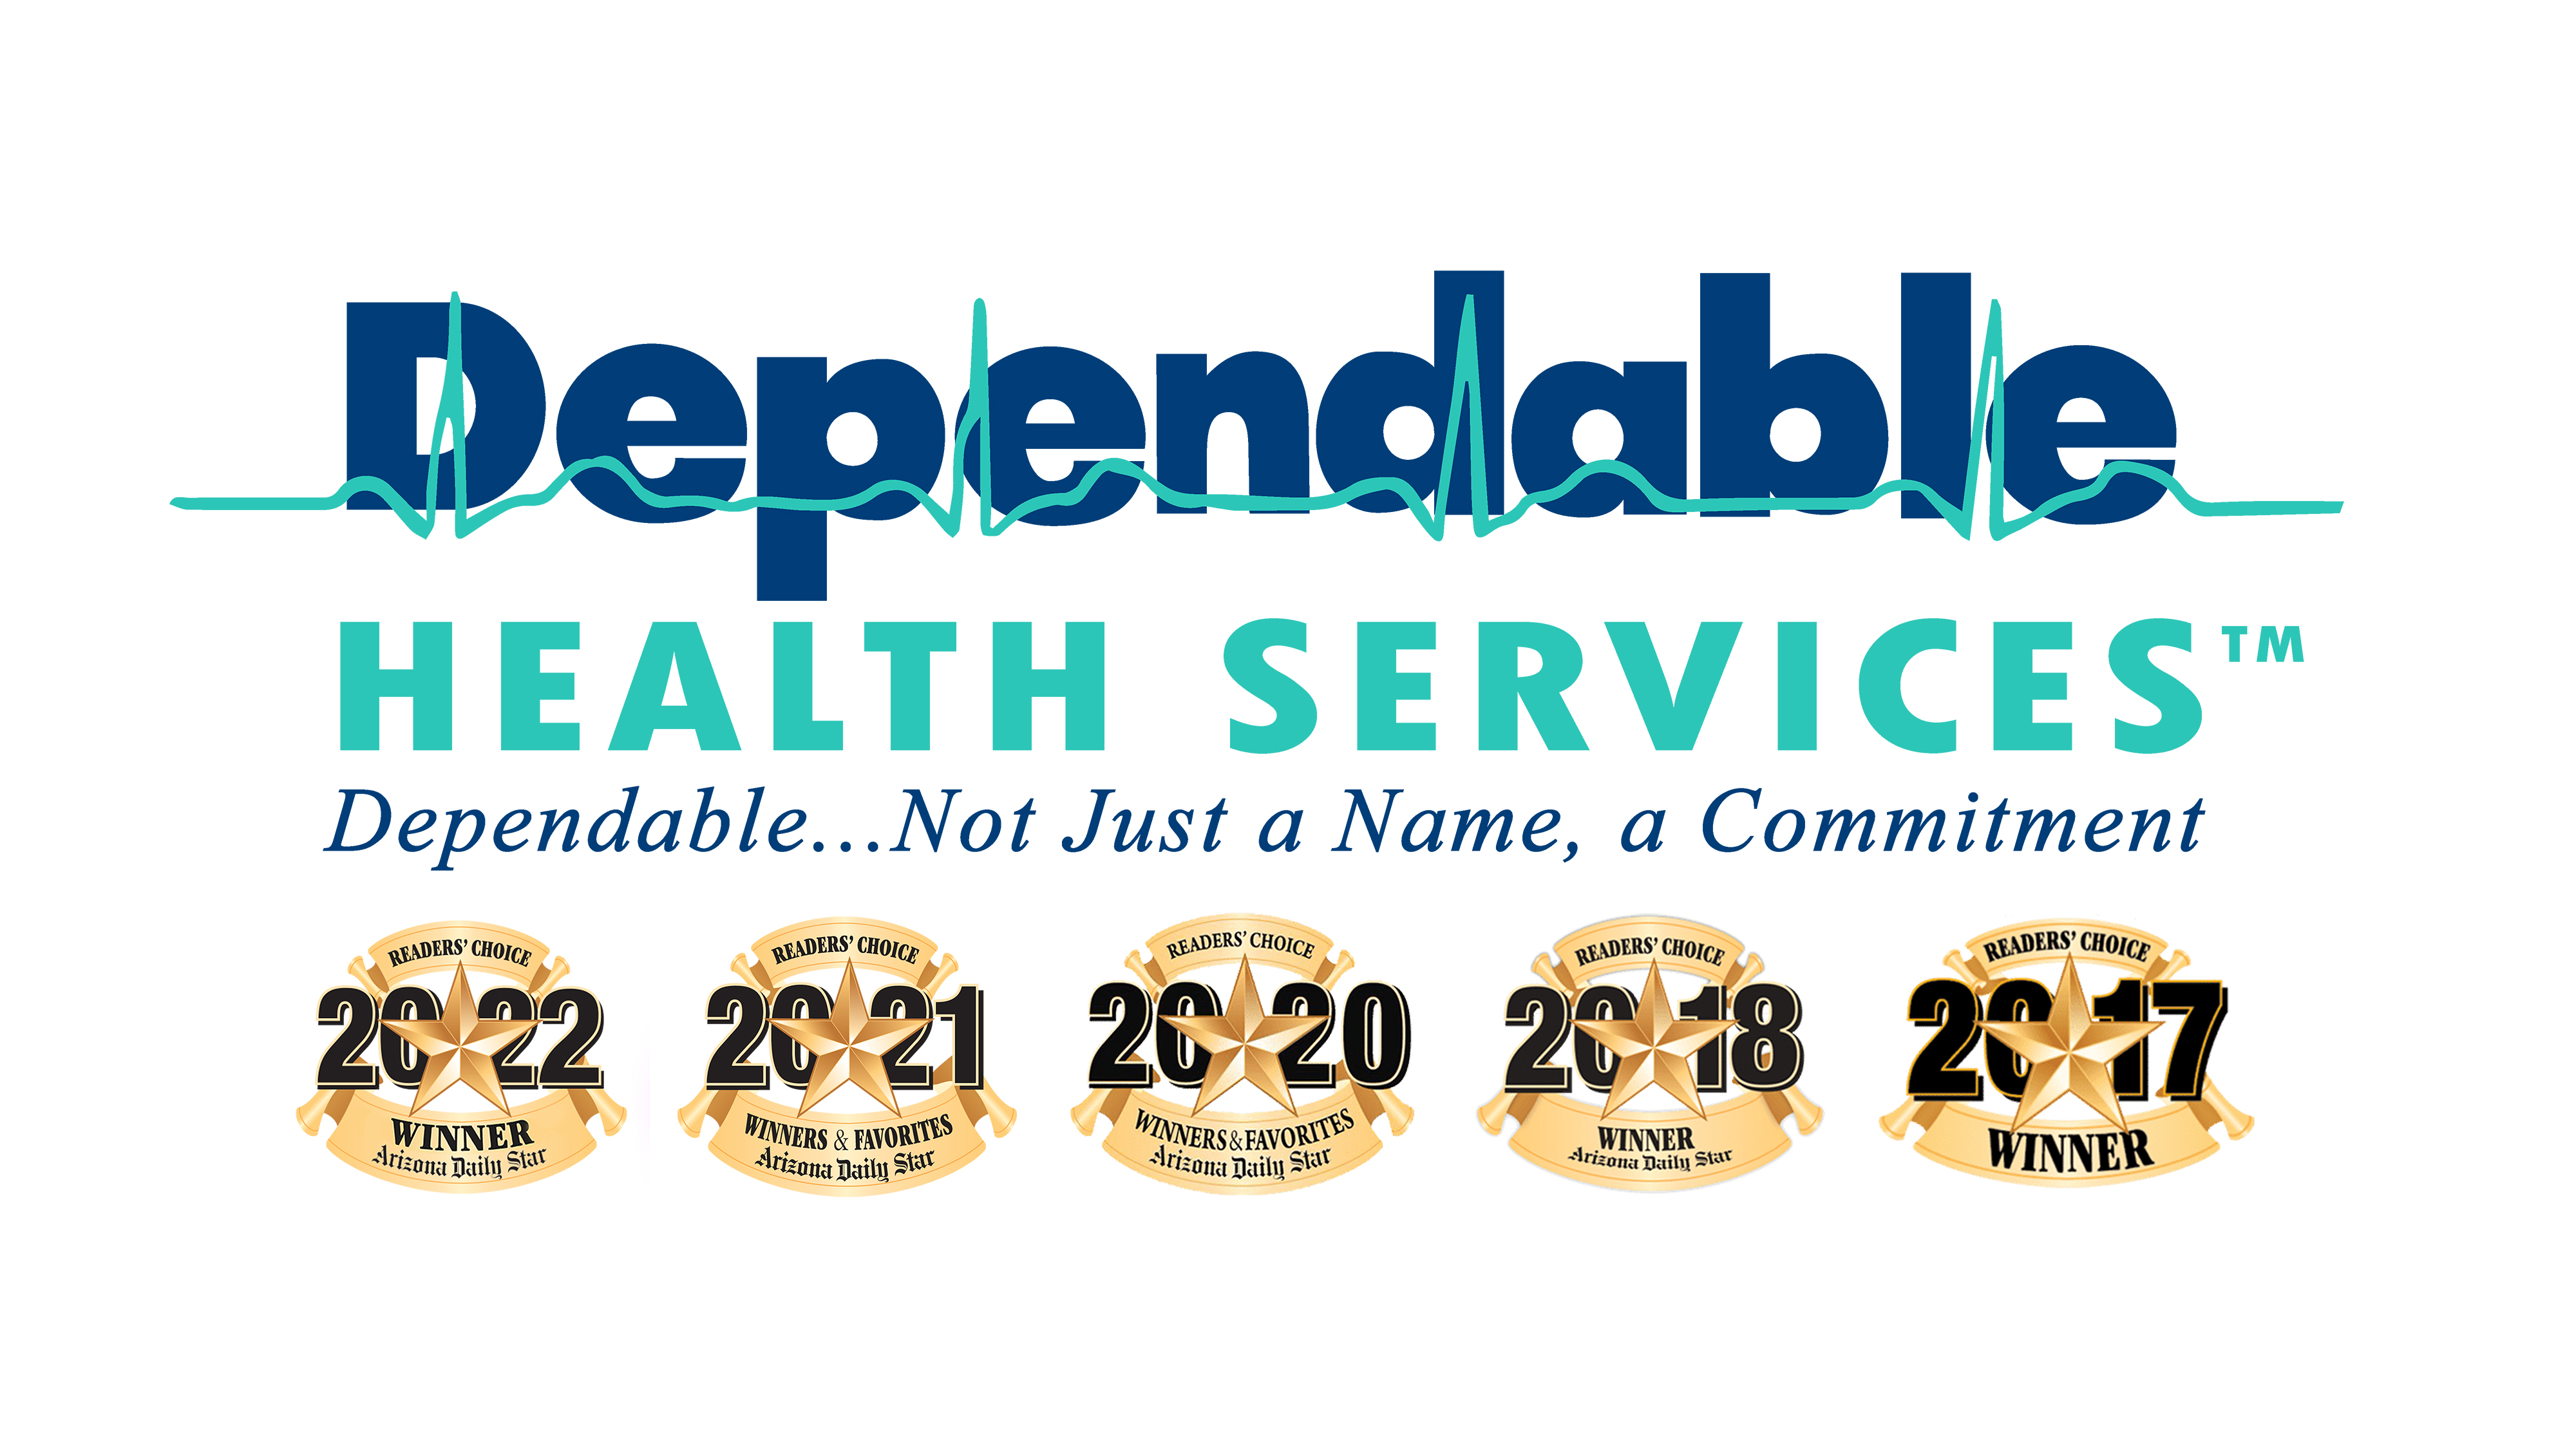 06. Dependable Health Services (Silver)